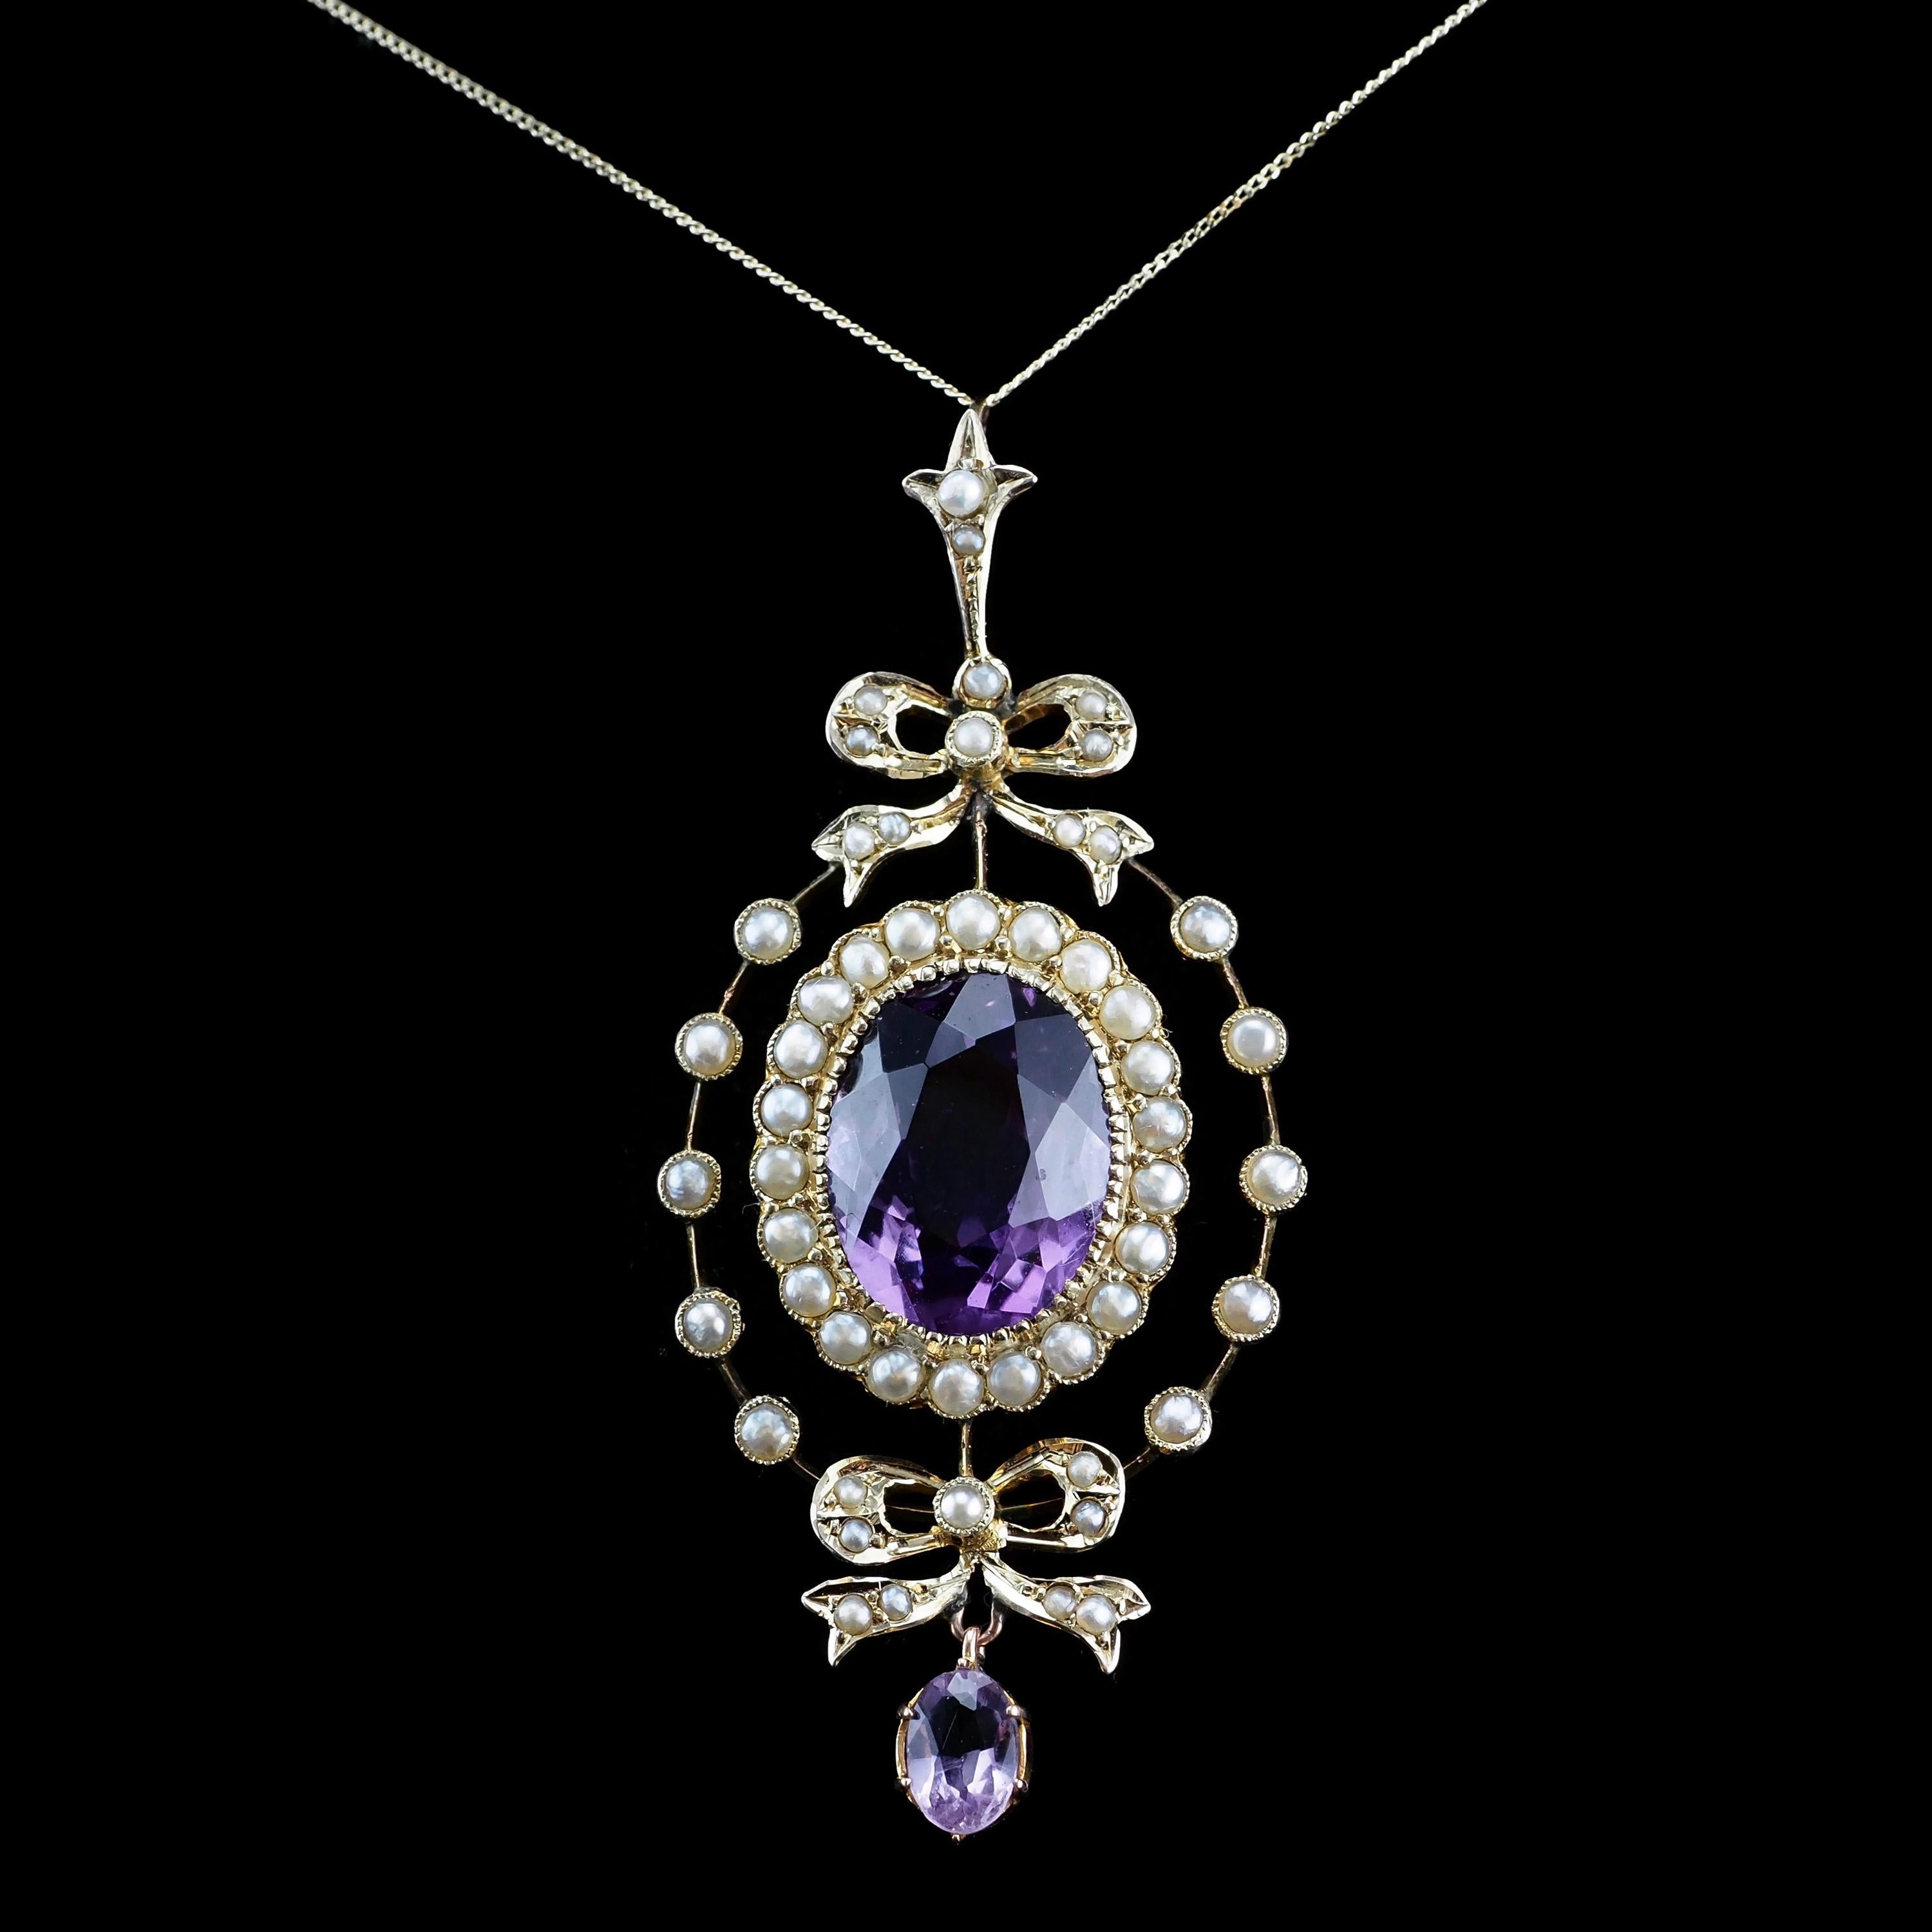 Antique Edwardian Amethyst & Seed Pearl 9k Gold Necklace Pendant, circa 1905 2